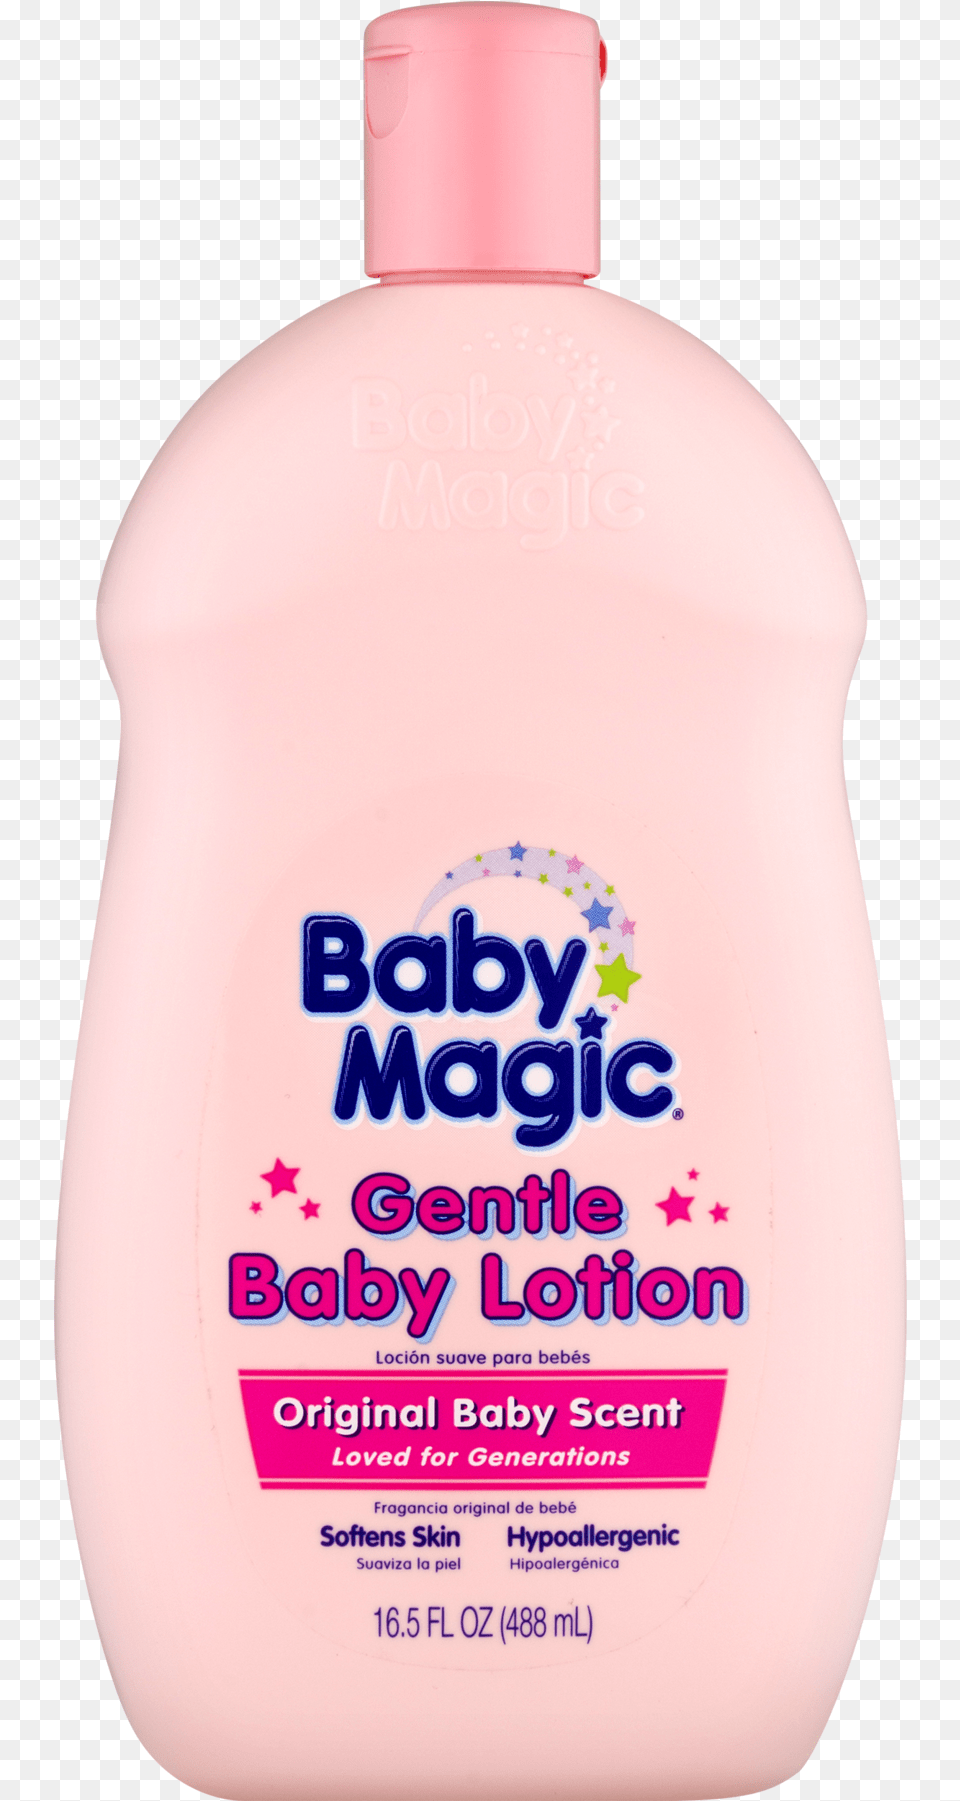 Baby Magic Gentle Baby Lotion Original Baby Scent, Bottle, Cosmetics Free Png Download